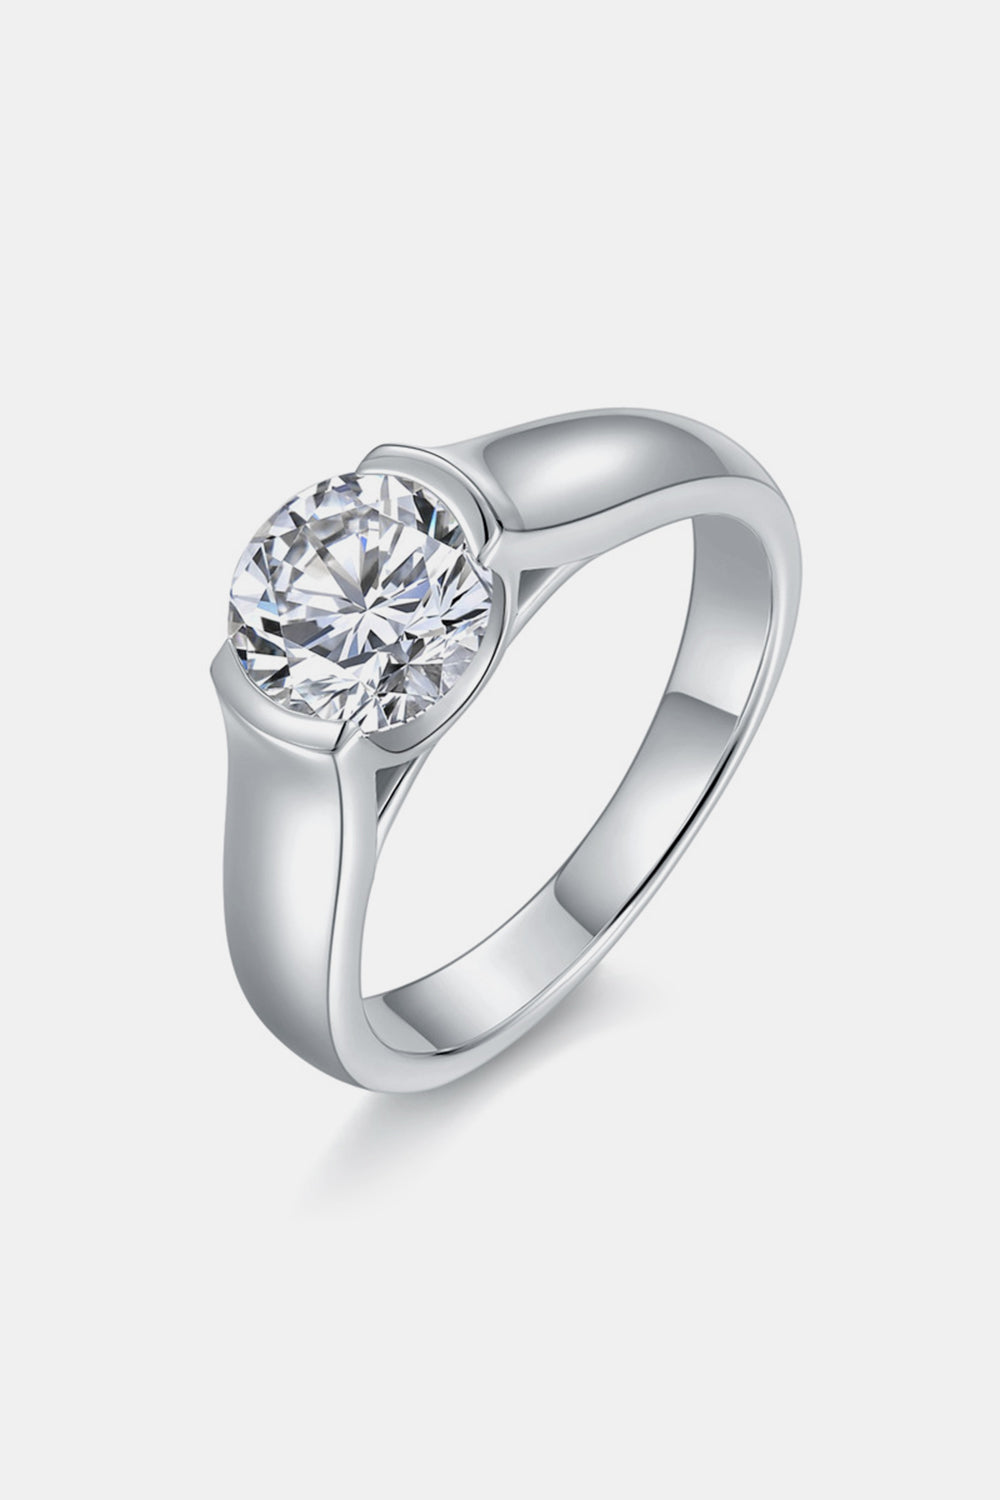 1.5 Carat Moissanite 925 Sterling Silver Ring - Tophatter Deals and Online Shopping - Electronics, Jewelry, Beauty, Health, Gadgets, Fashion - Tophatter's Discounts & Offers - tophatters